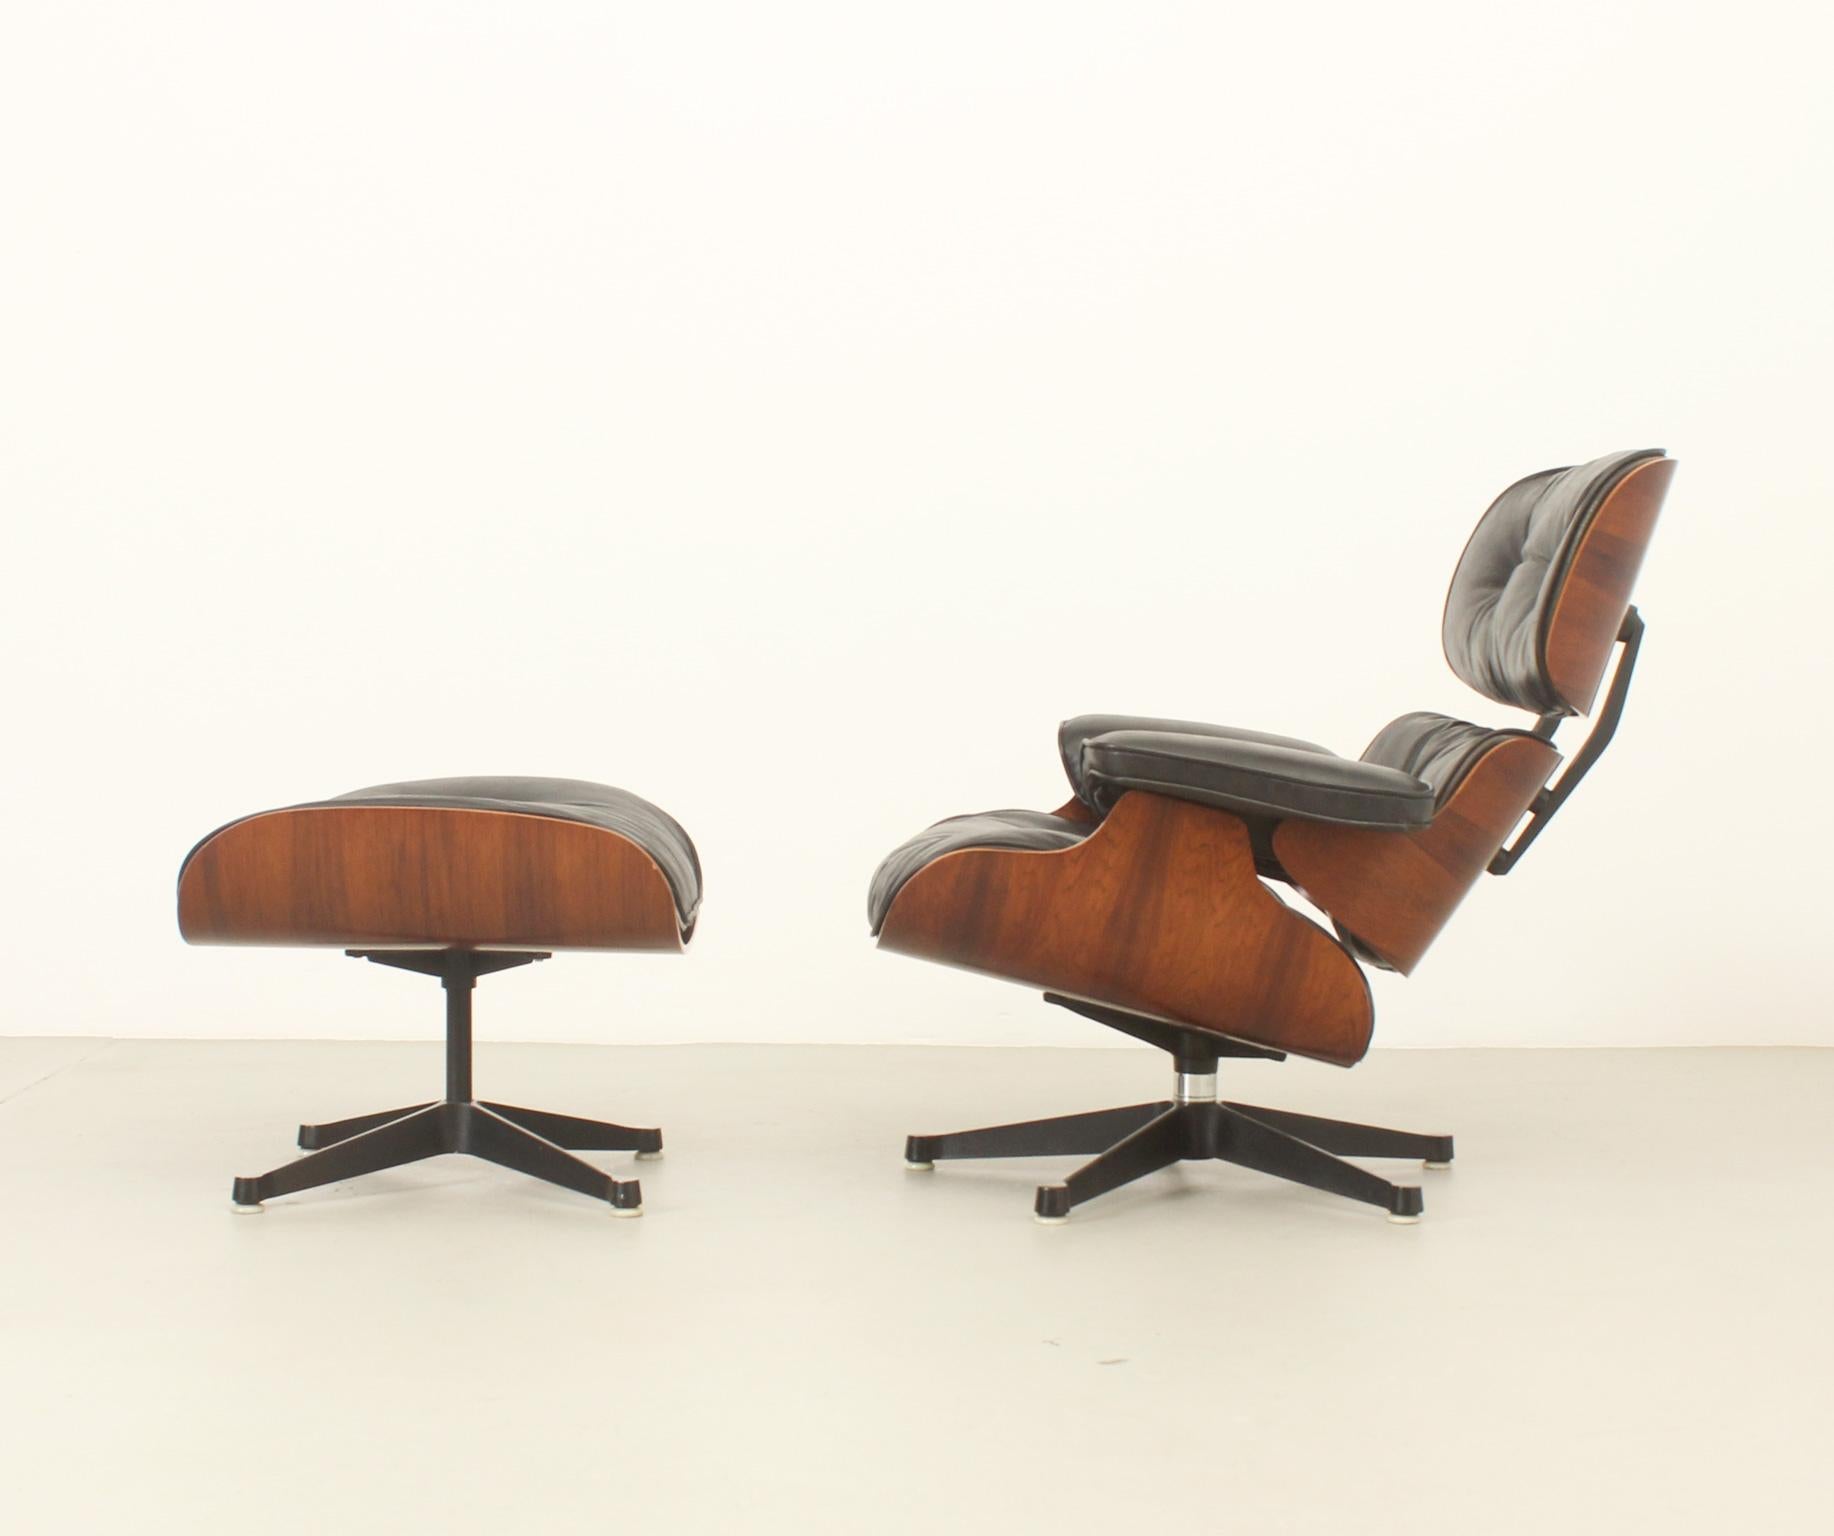 Lounge chair and ottoman designed in 1956 by Charles and Ray Eames for Herman Miller, USA. Early edition from 1960's for Mobilier International, France in rosewood plywood and black leather. 